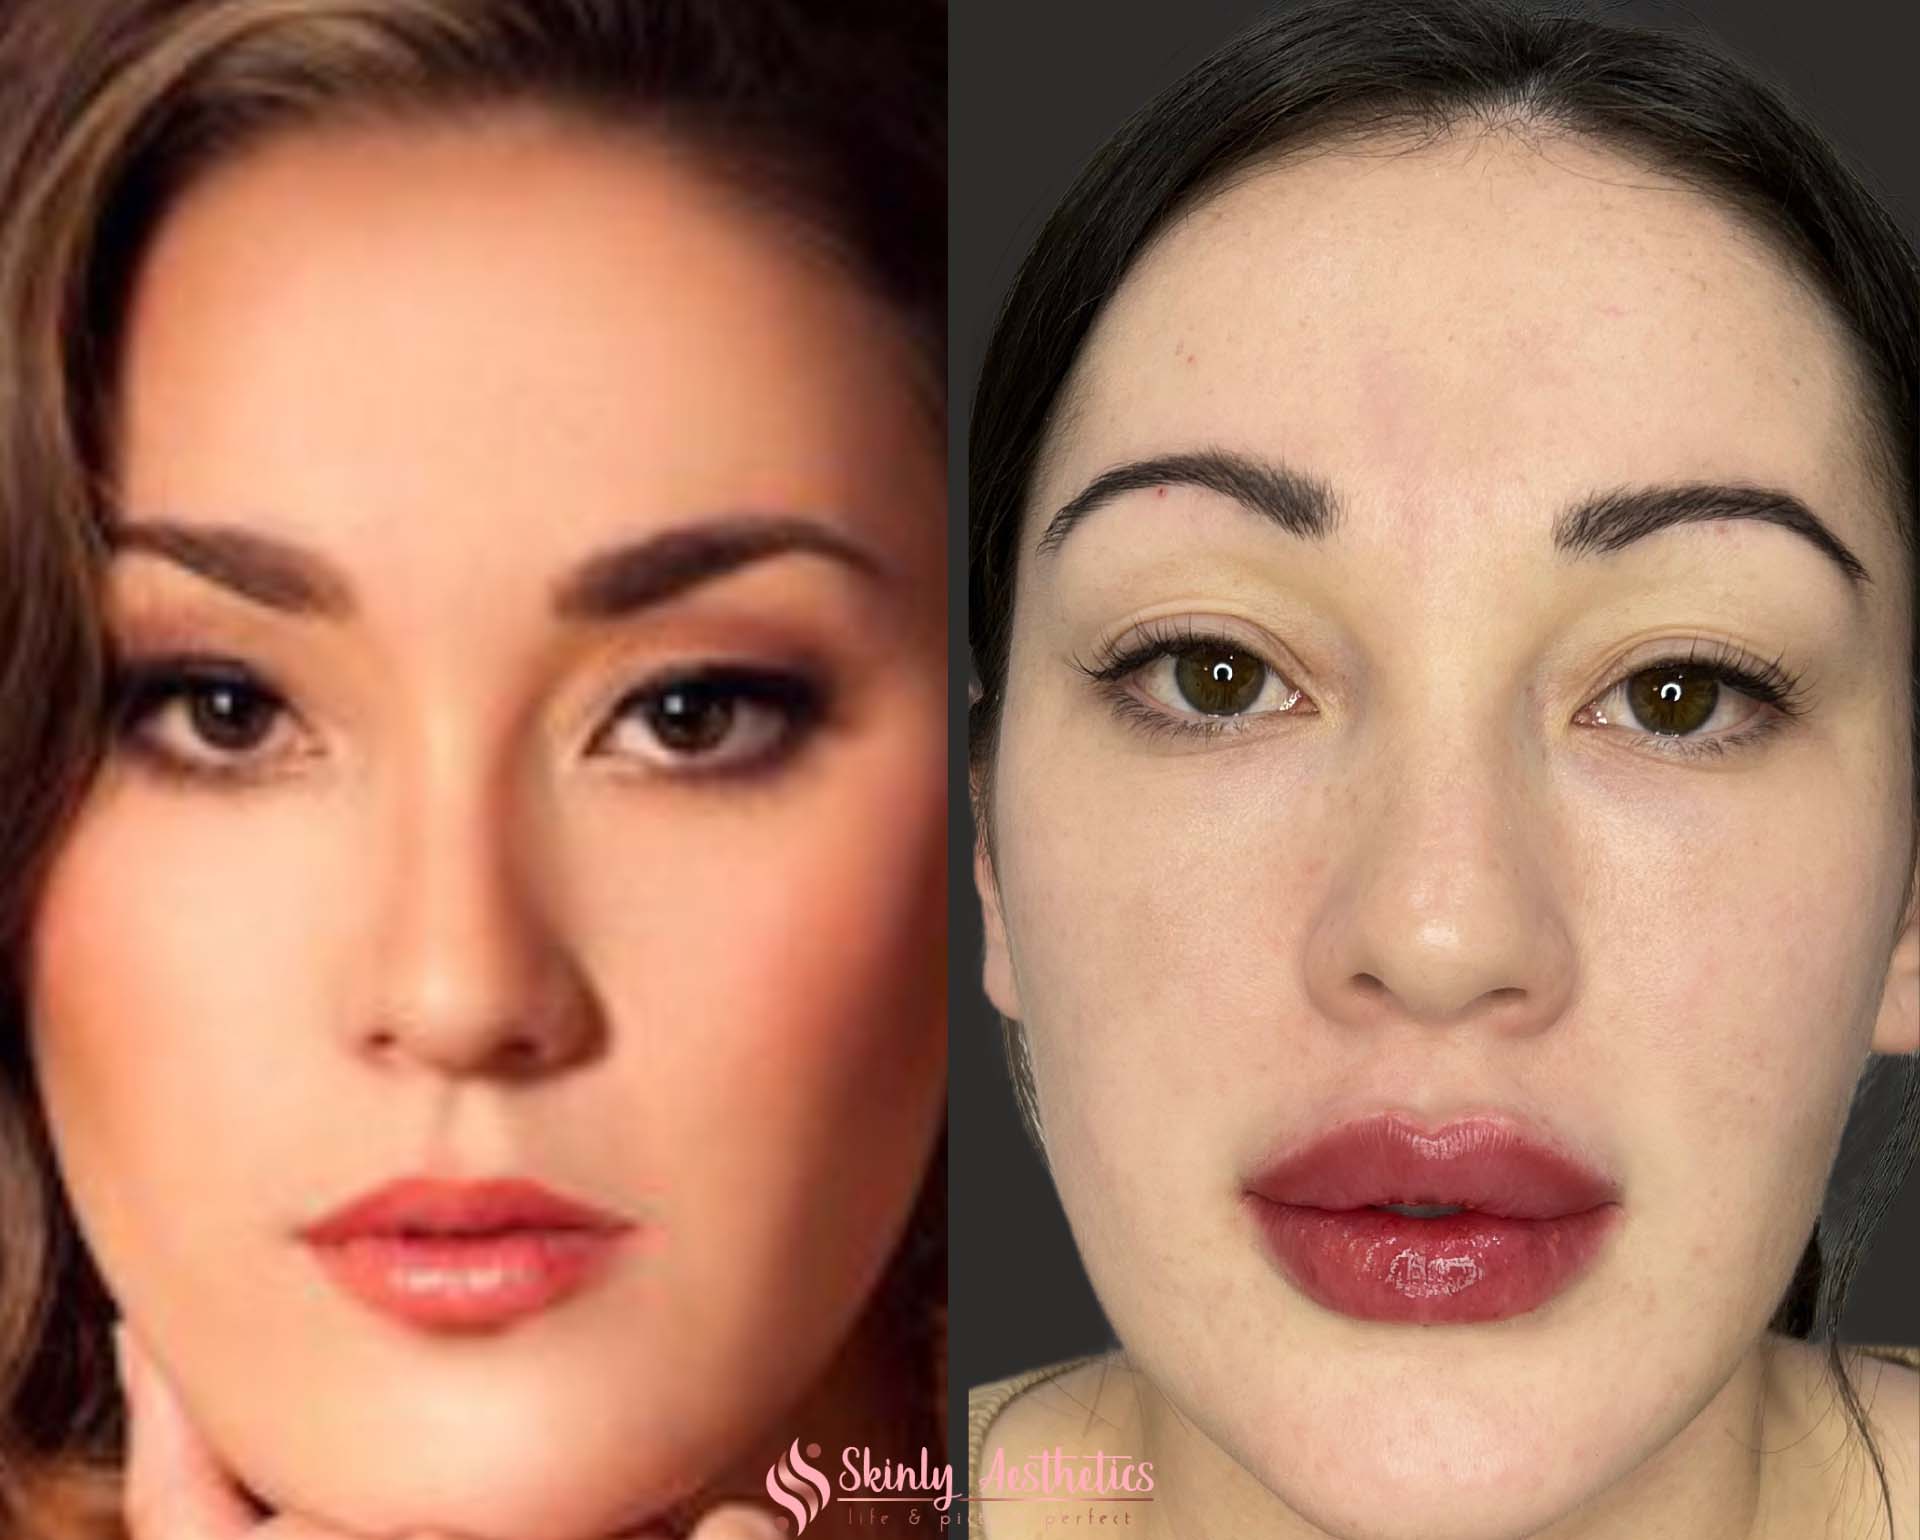 results of russian doll lip technique with juvederm dermal filler